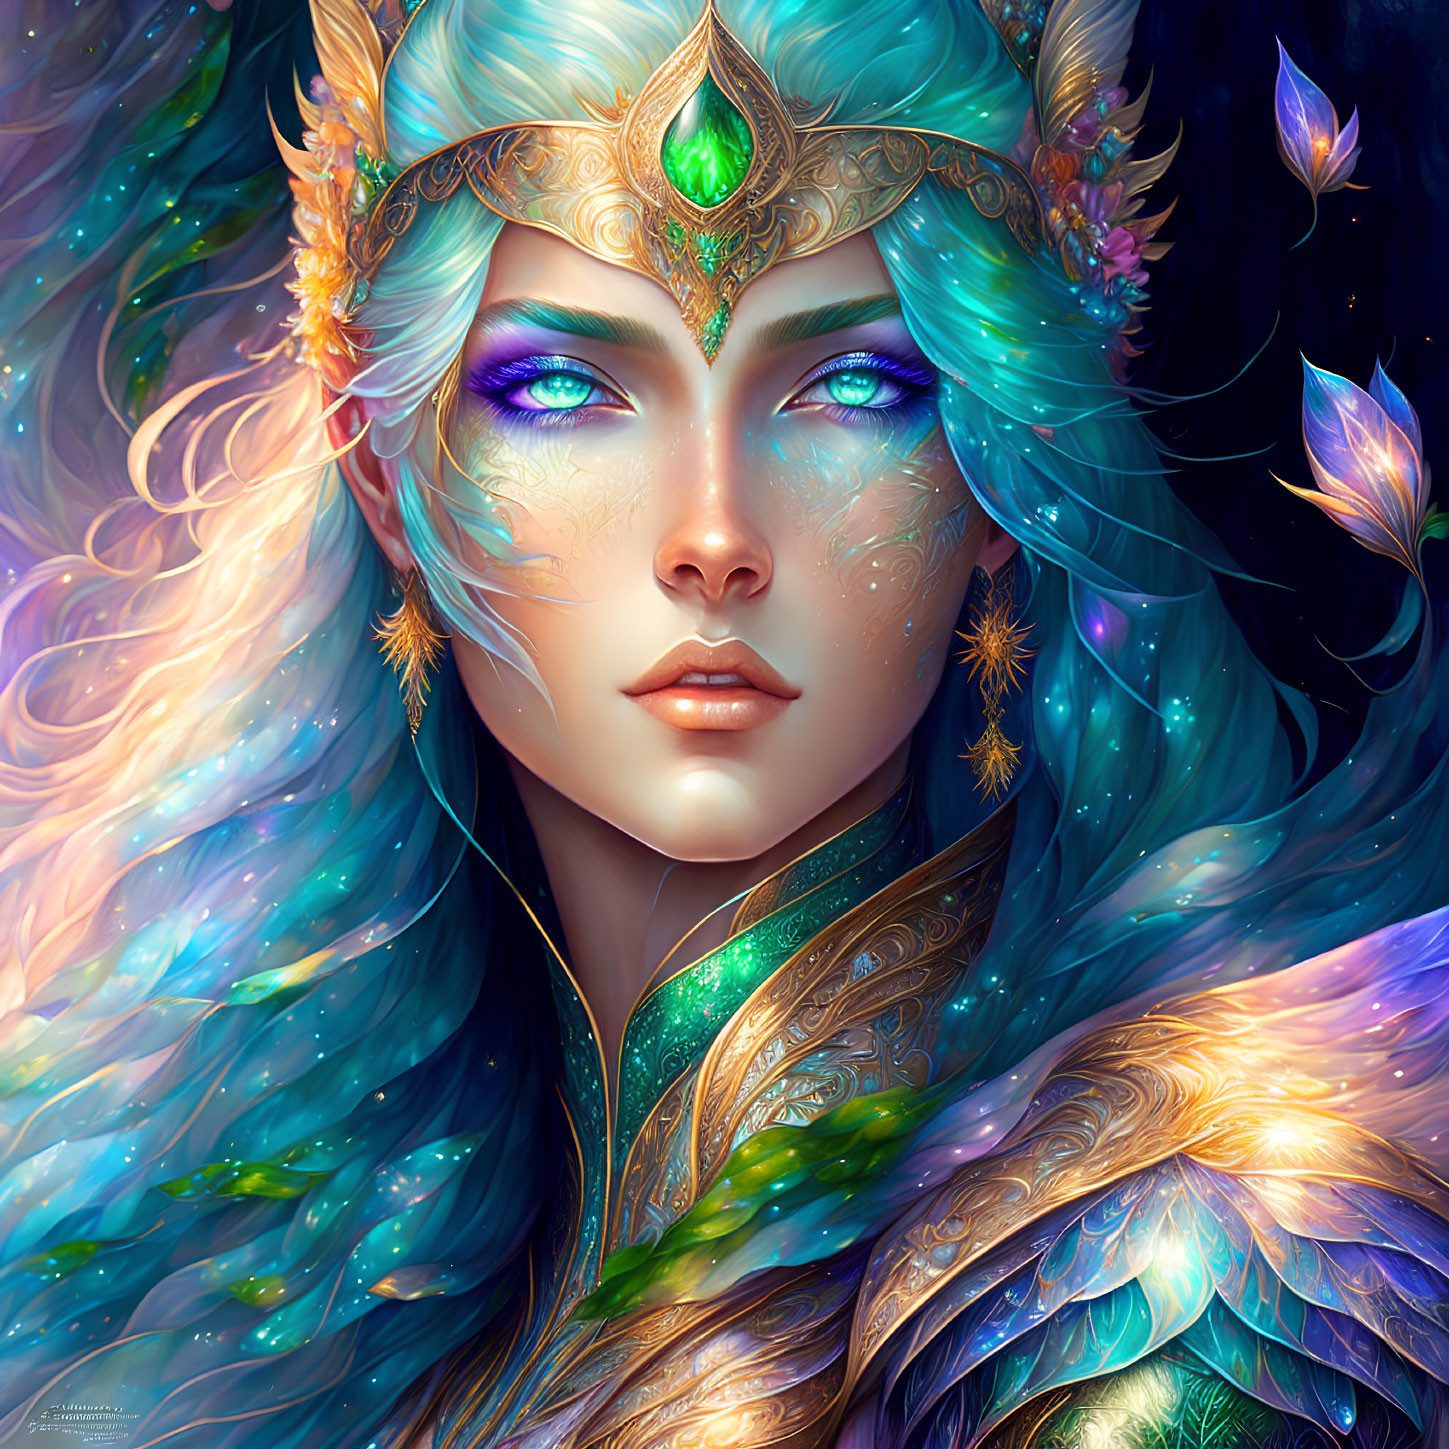 Fantasy illustration of woman with blue hair, golden crown, armor, and floating leaves